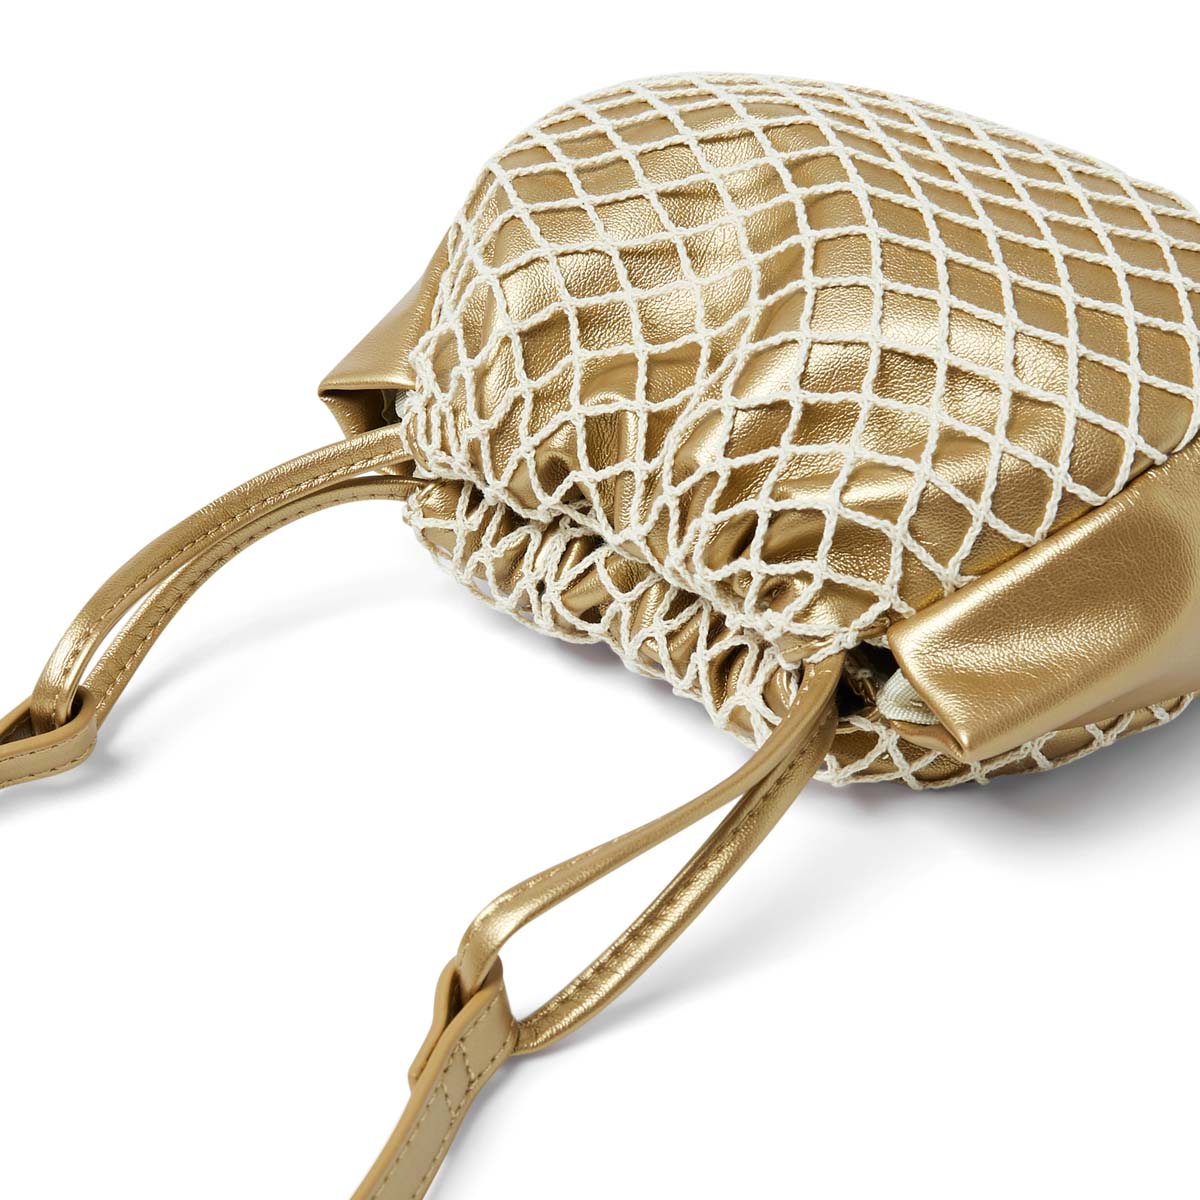 Round bag with mesh detail - 2 colors - Women